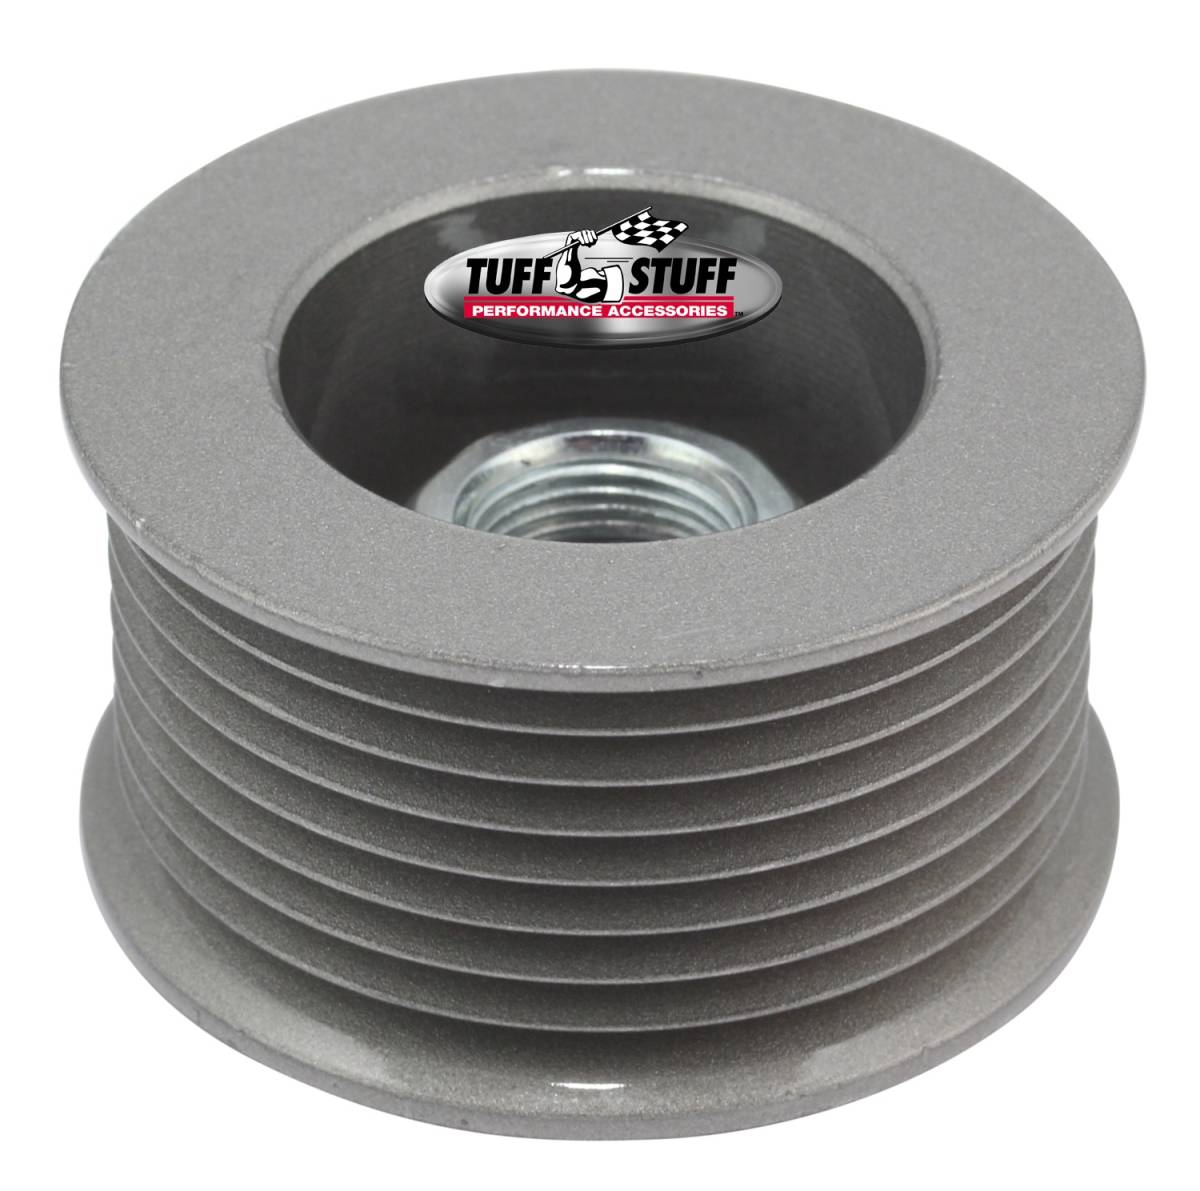 Tuff Stuff Performance - Alternator Pulley 2.25 in. 8 Groove Serpentine Incl. Lock Washer/Nut As Cast 7610DC